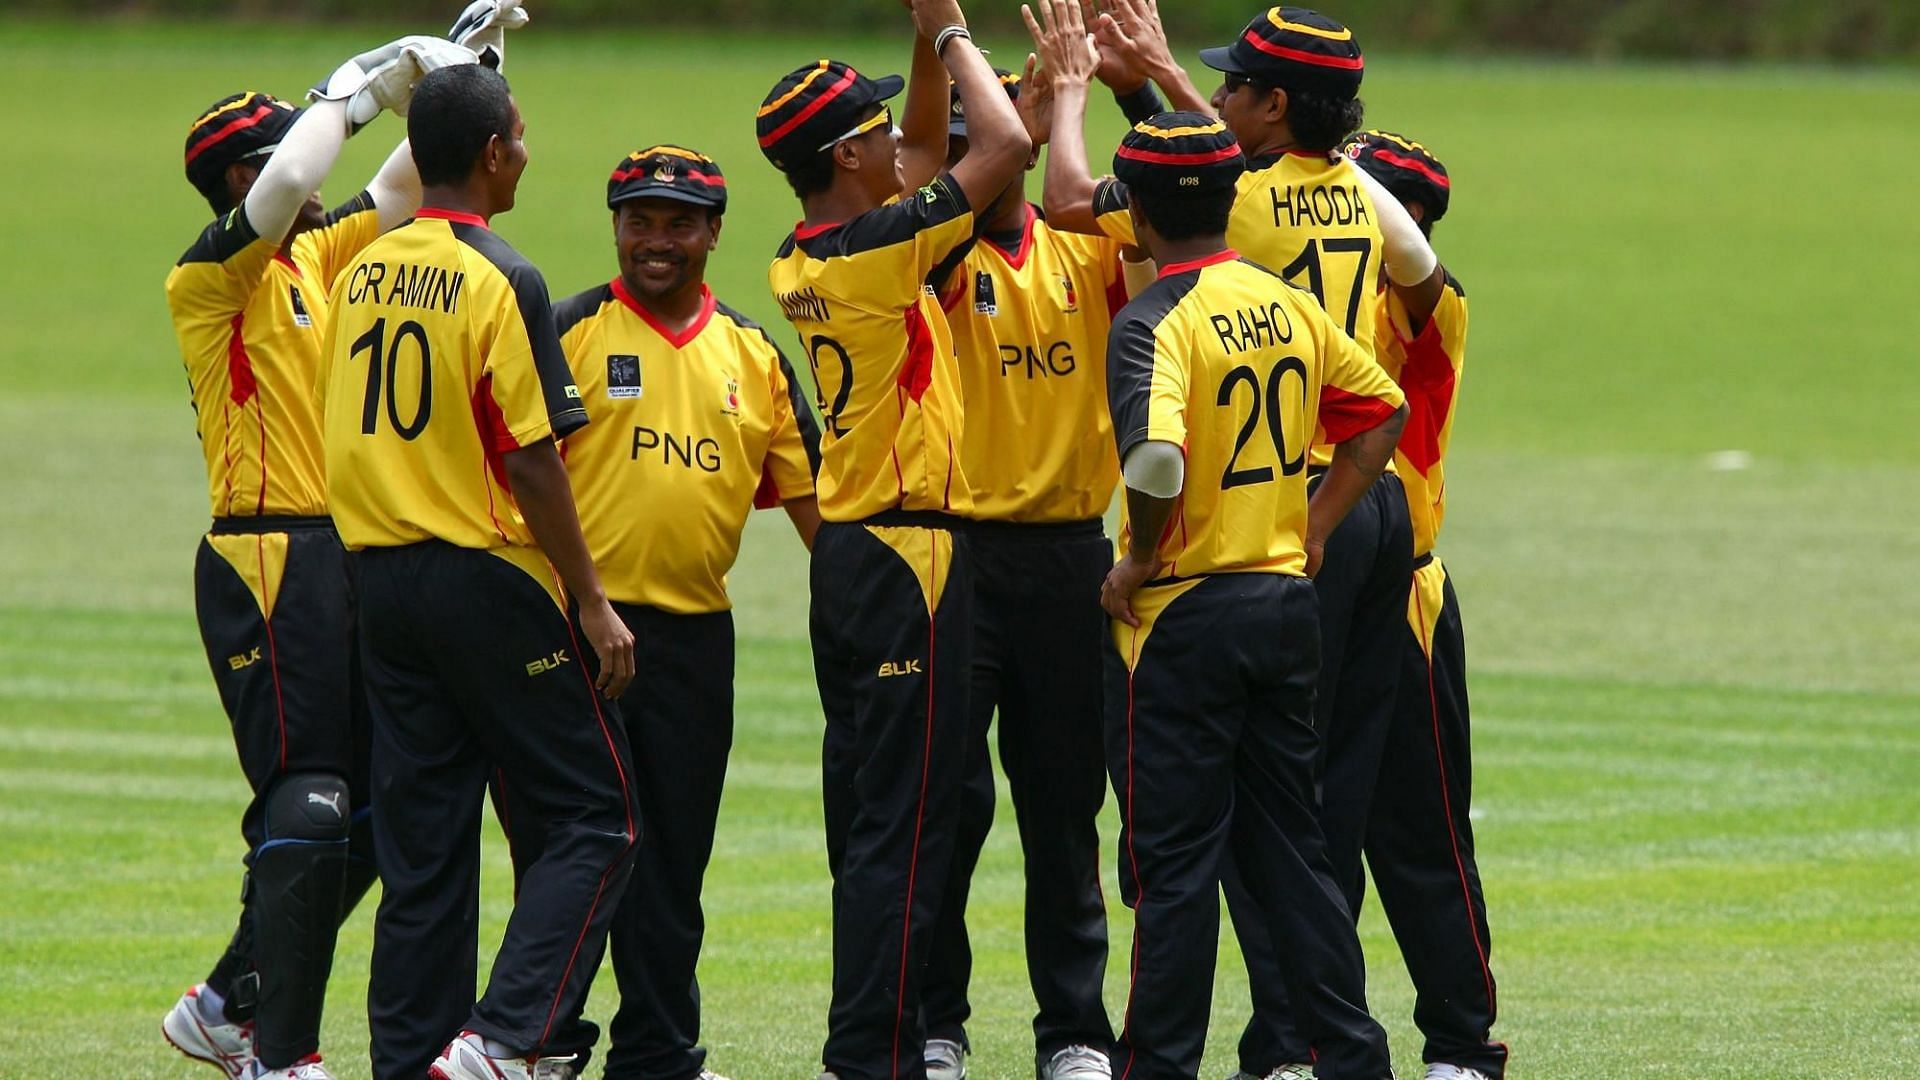 PNG Cricket Team (Image Courtesy: ICC)